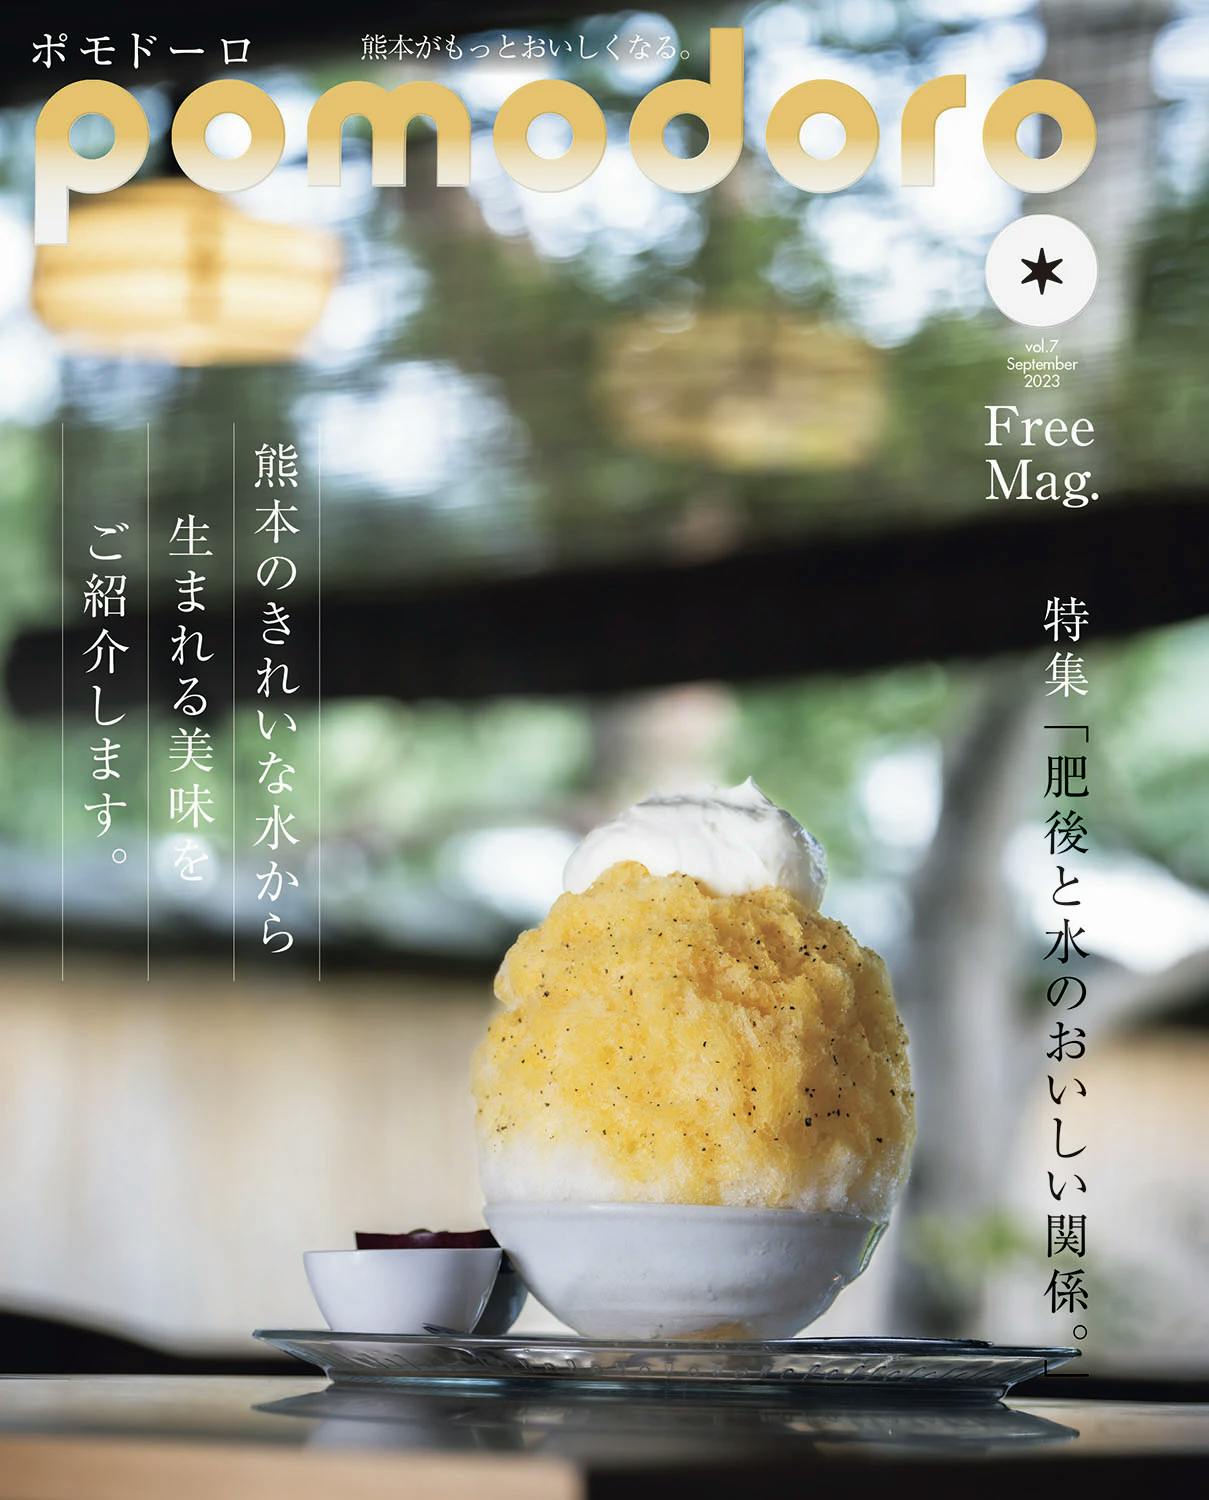 The 7th issue of the free magazine "pomodoro" is published. Web version is also available!